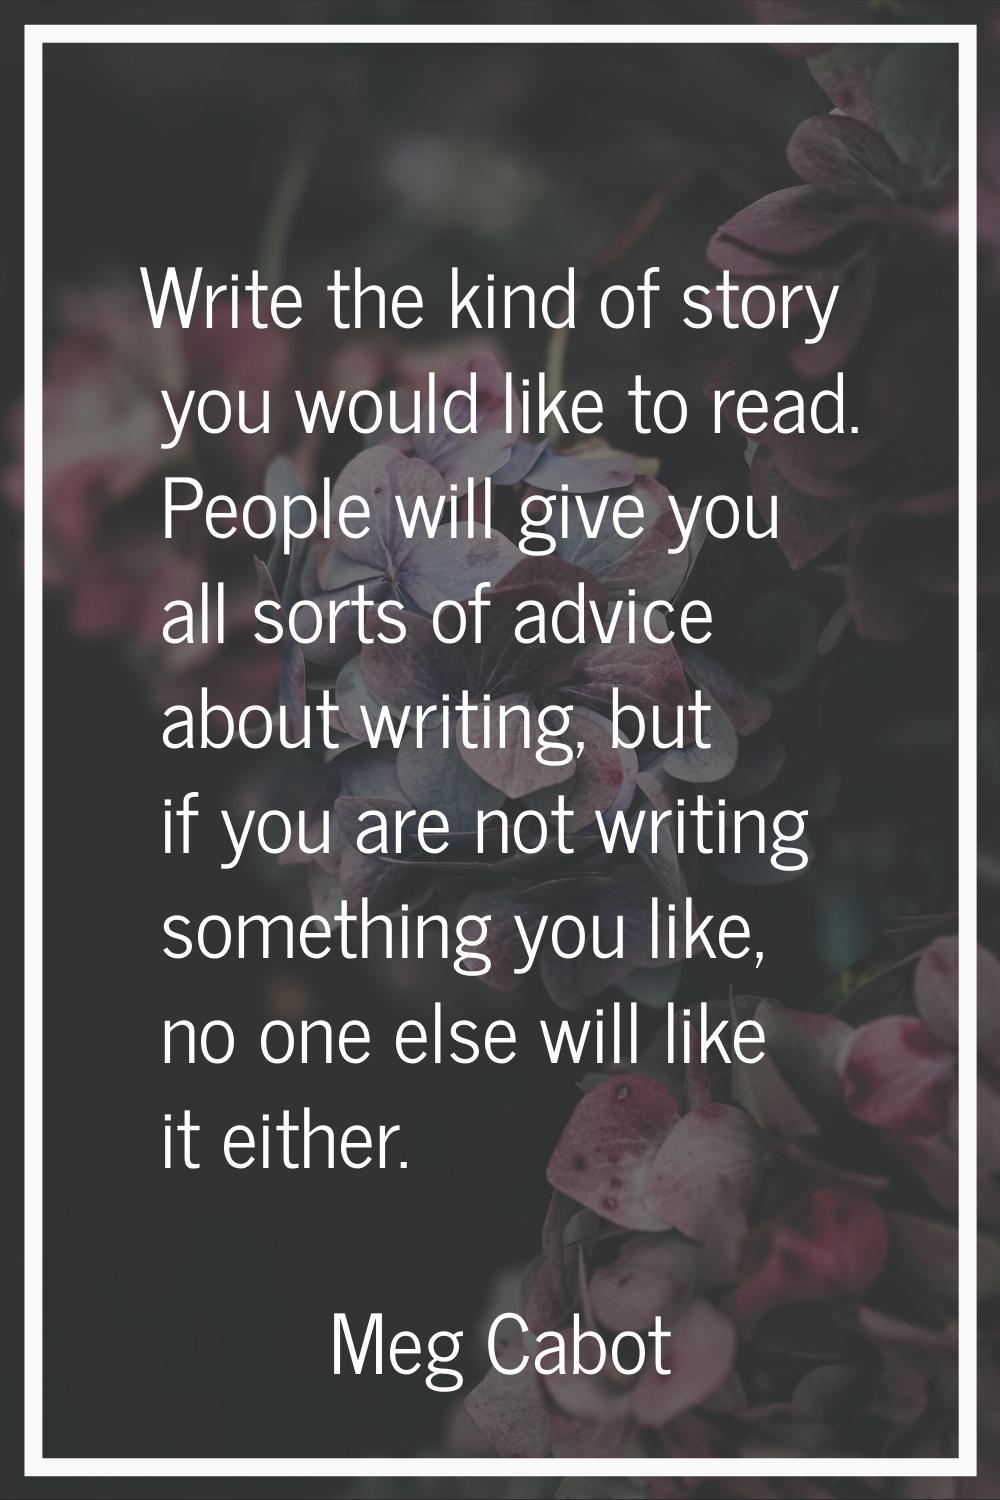 Write the kind of story you would like to read. People will give you all sorts of advice about writ